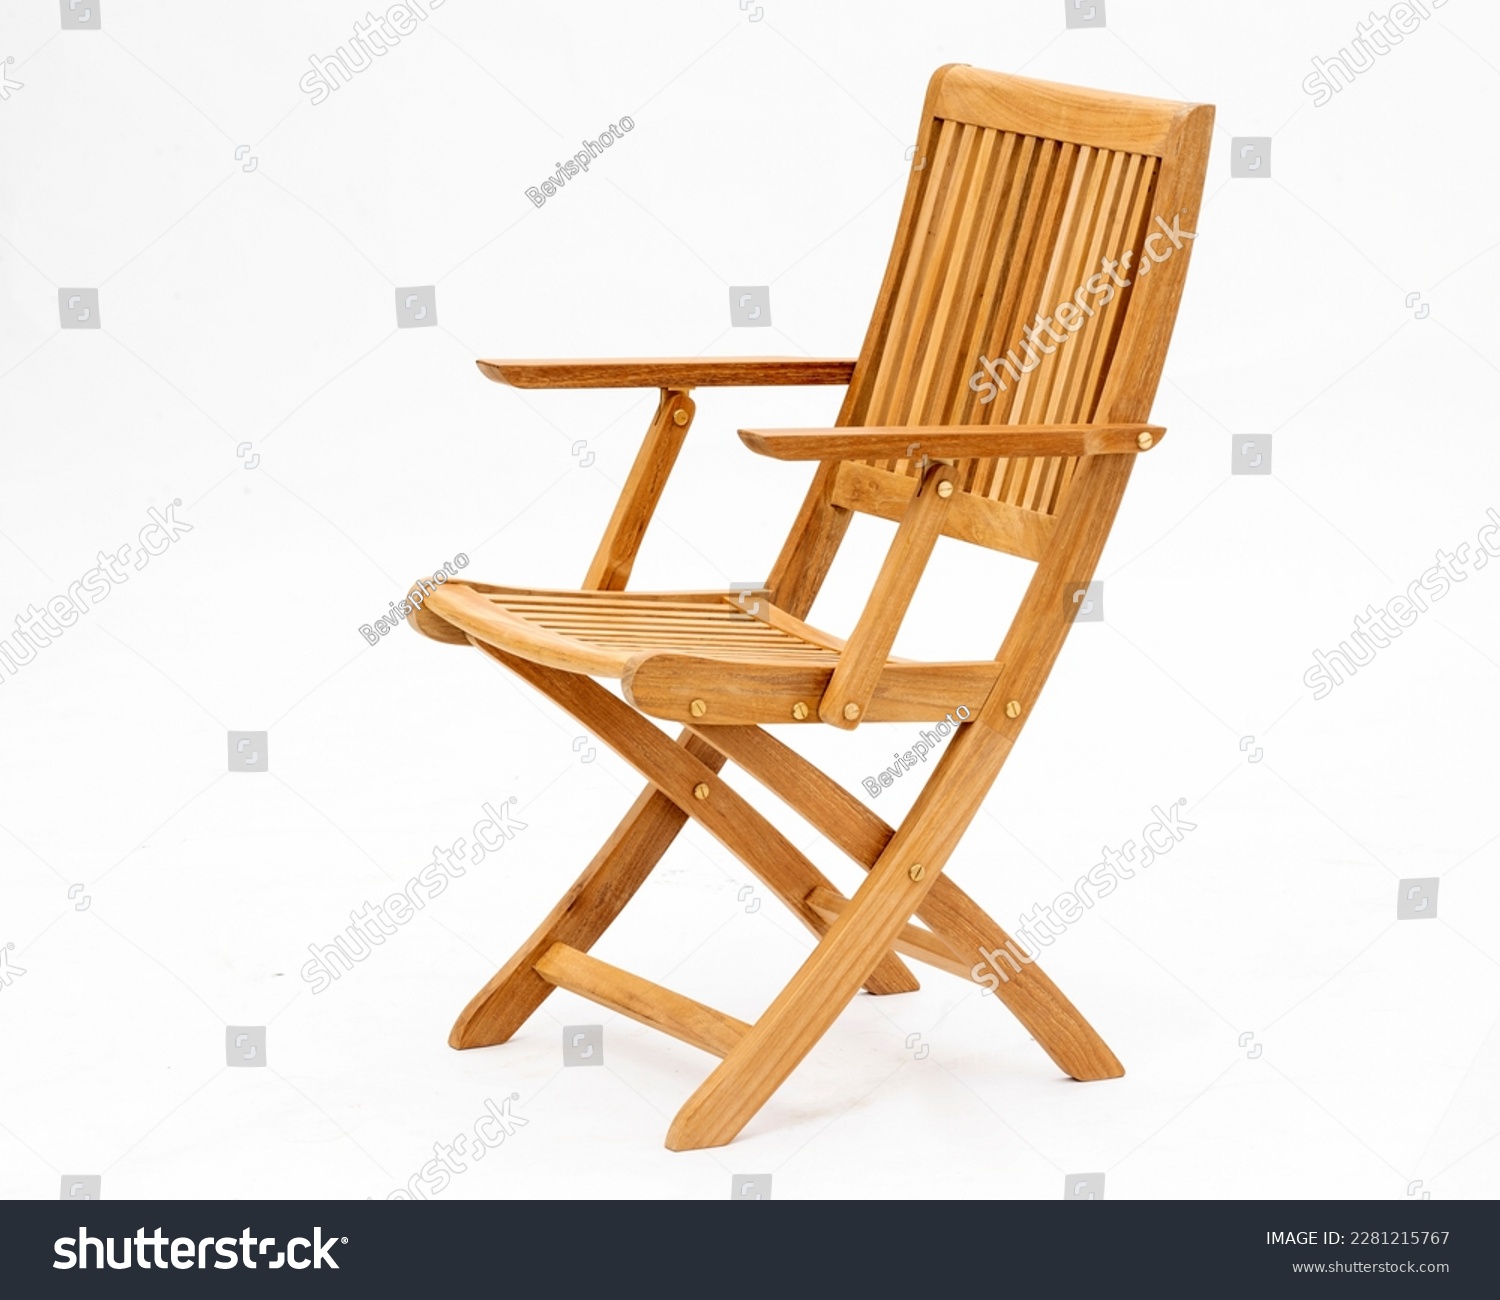 A wooden folding chair isolated on a white background. #2281215767